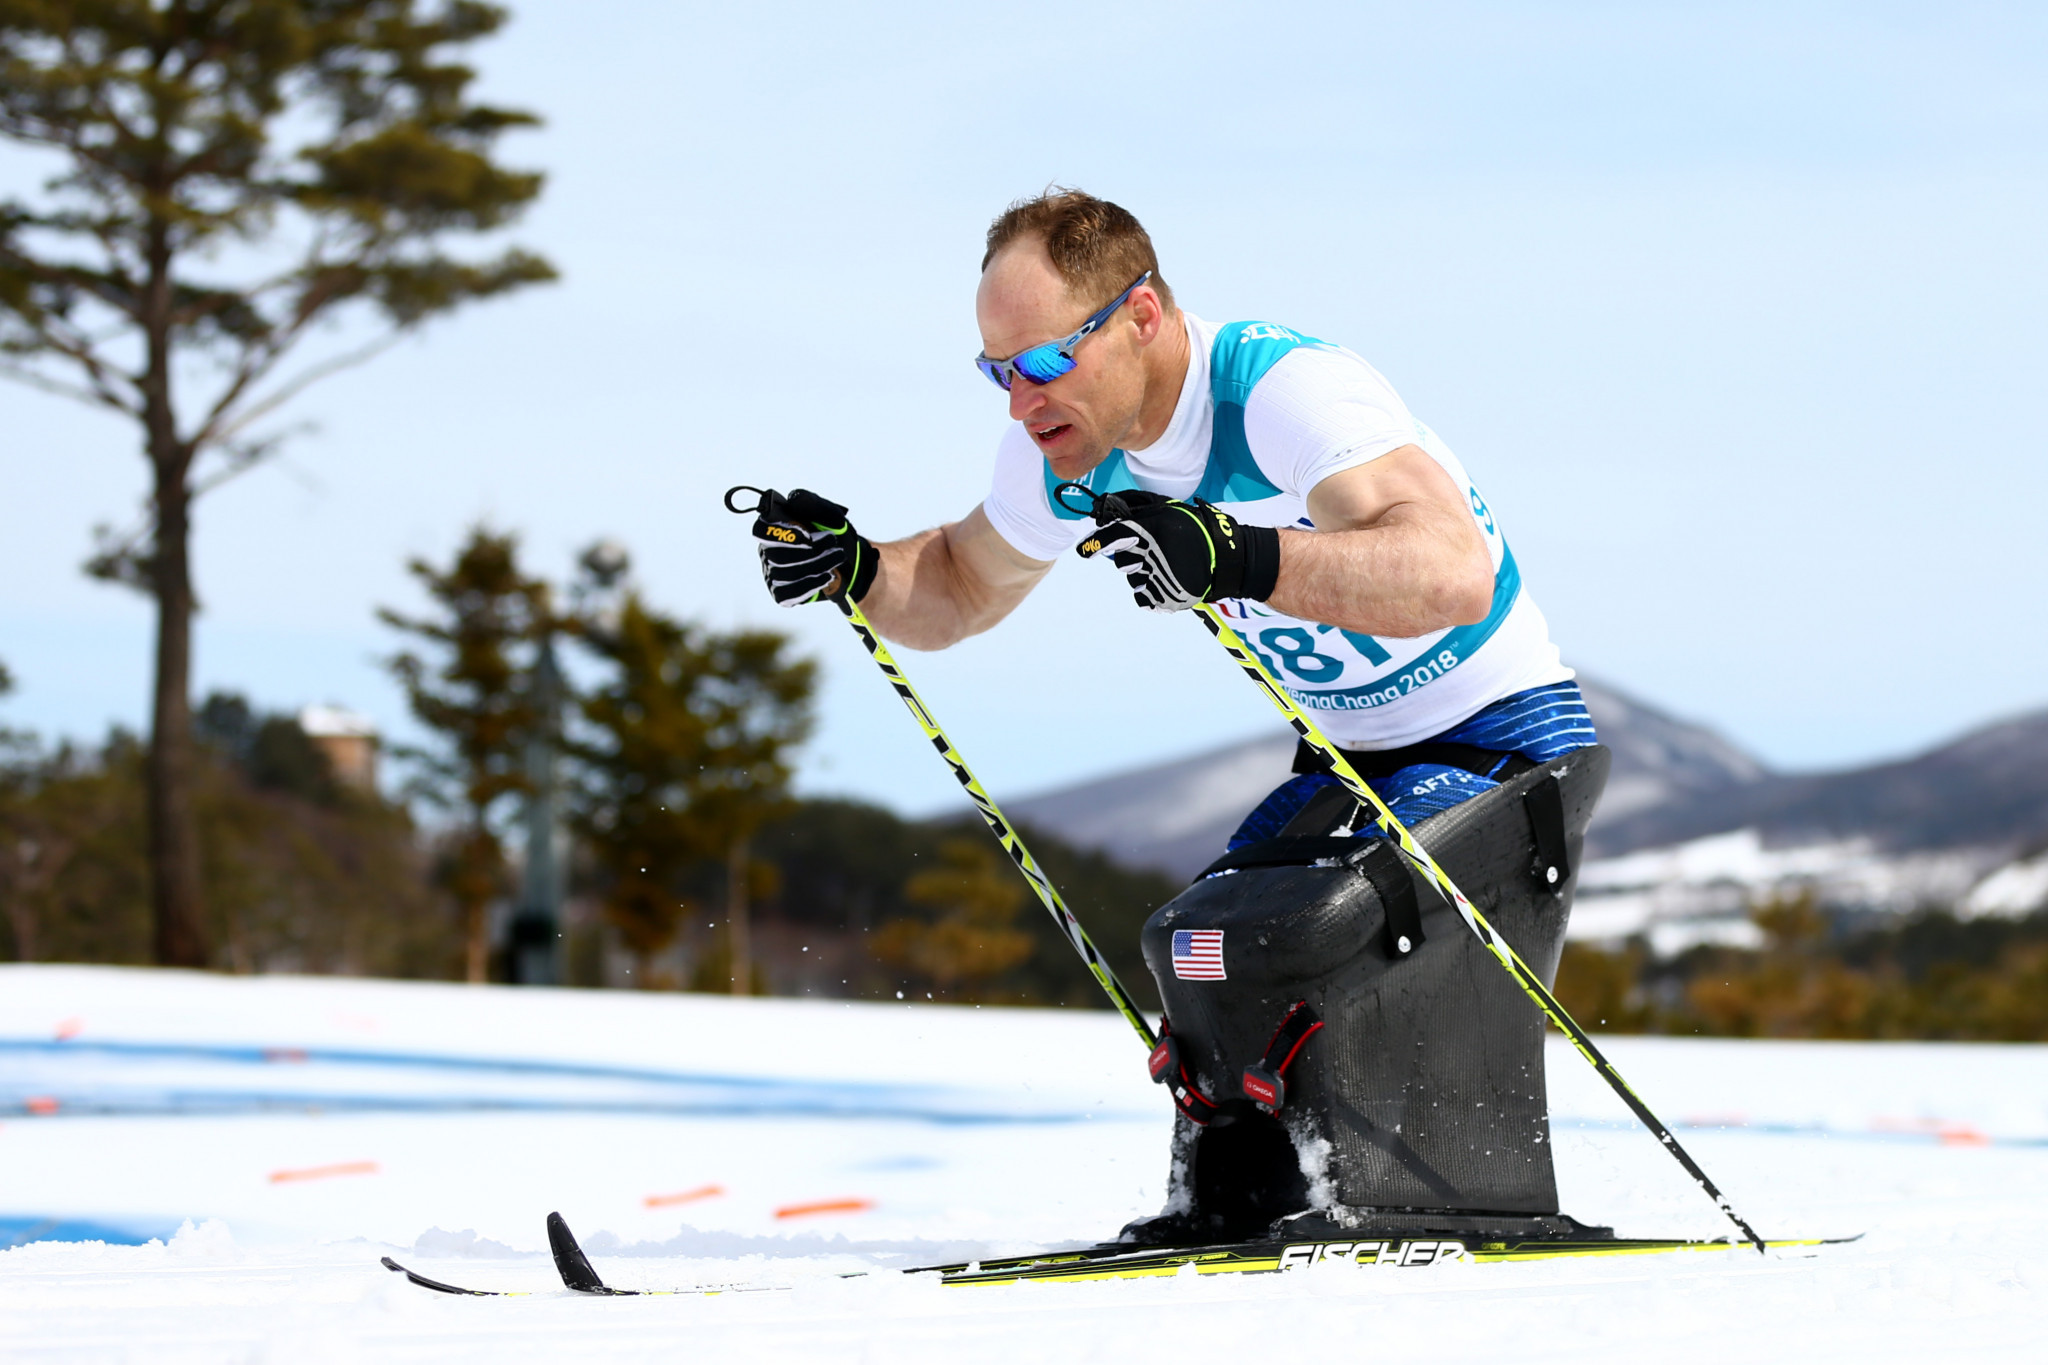 Sini Pyy uses Para Nordic skiing to advocate for the environment